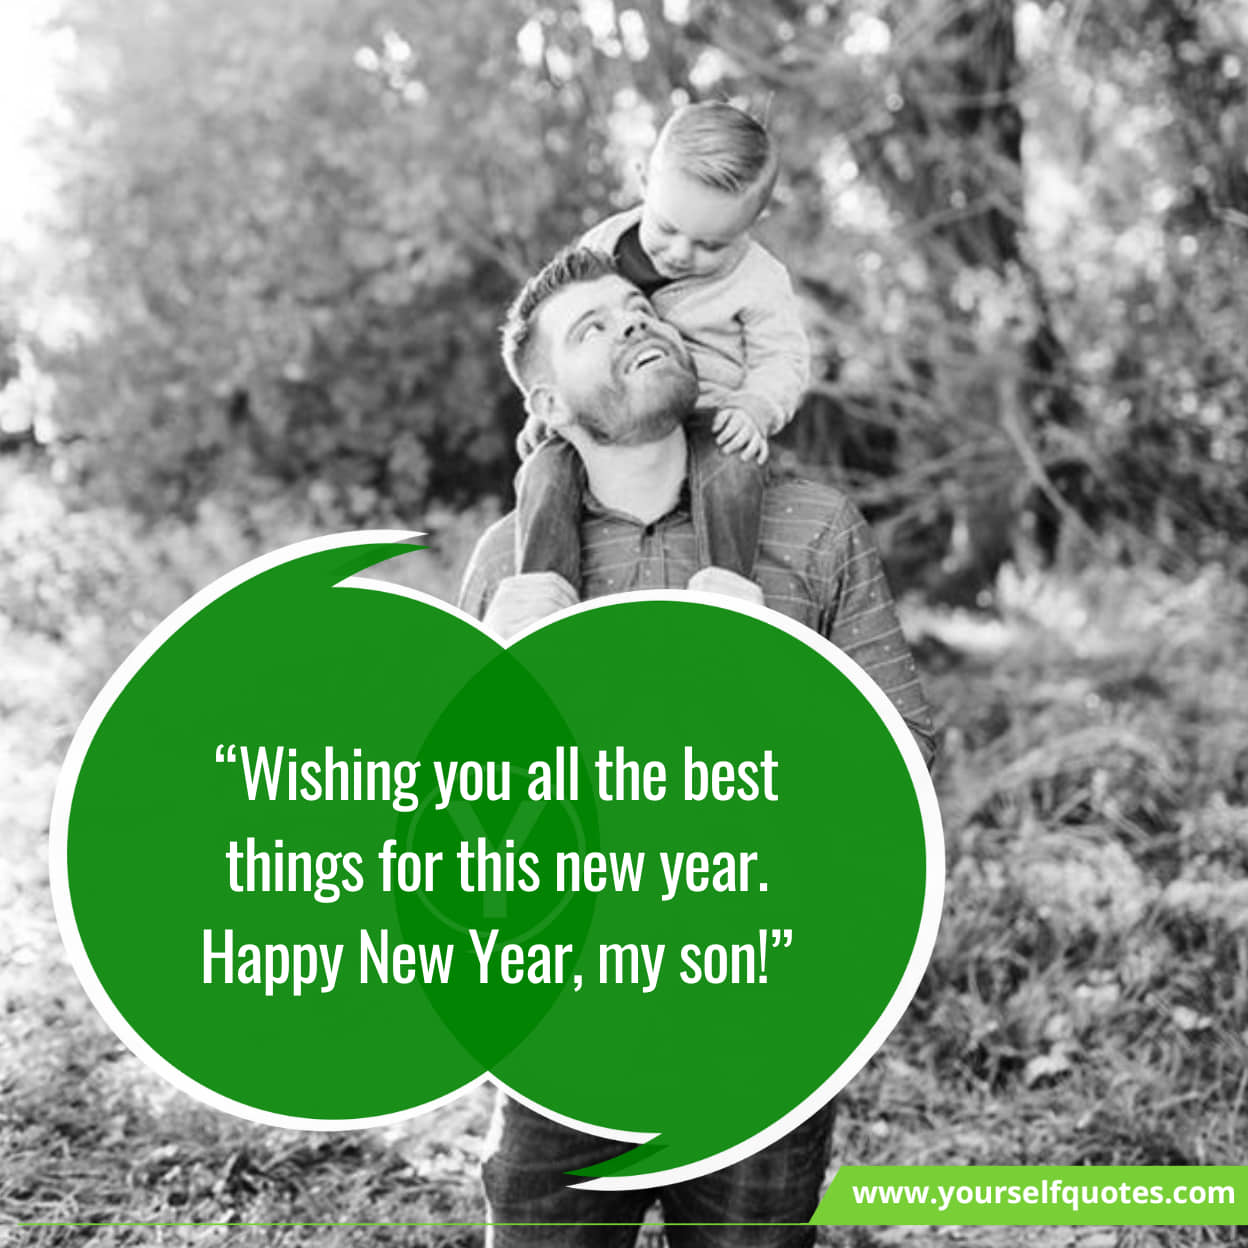 Happy New Year Wishes for Son